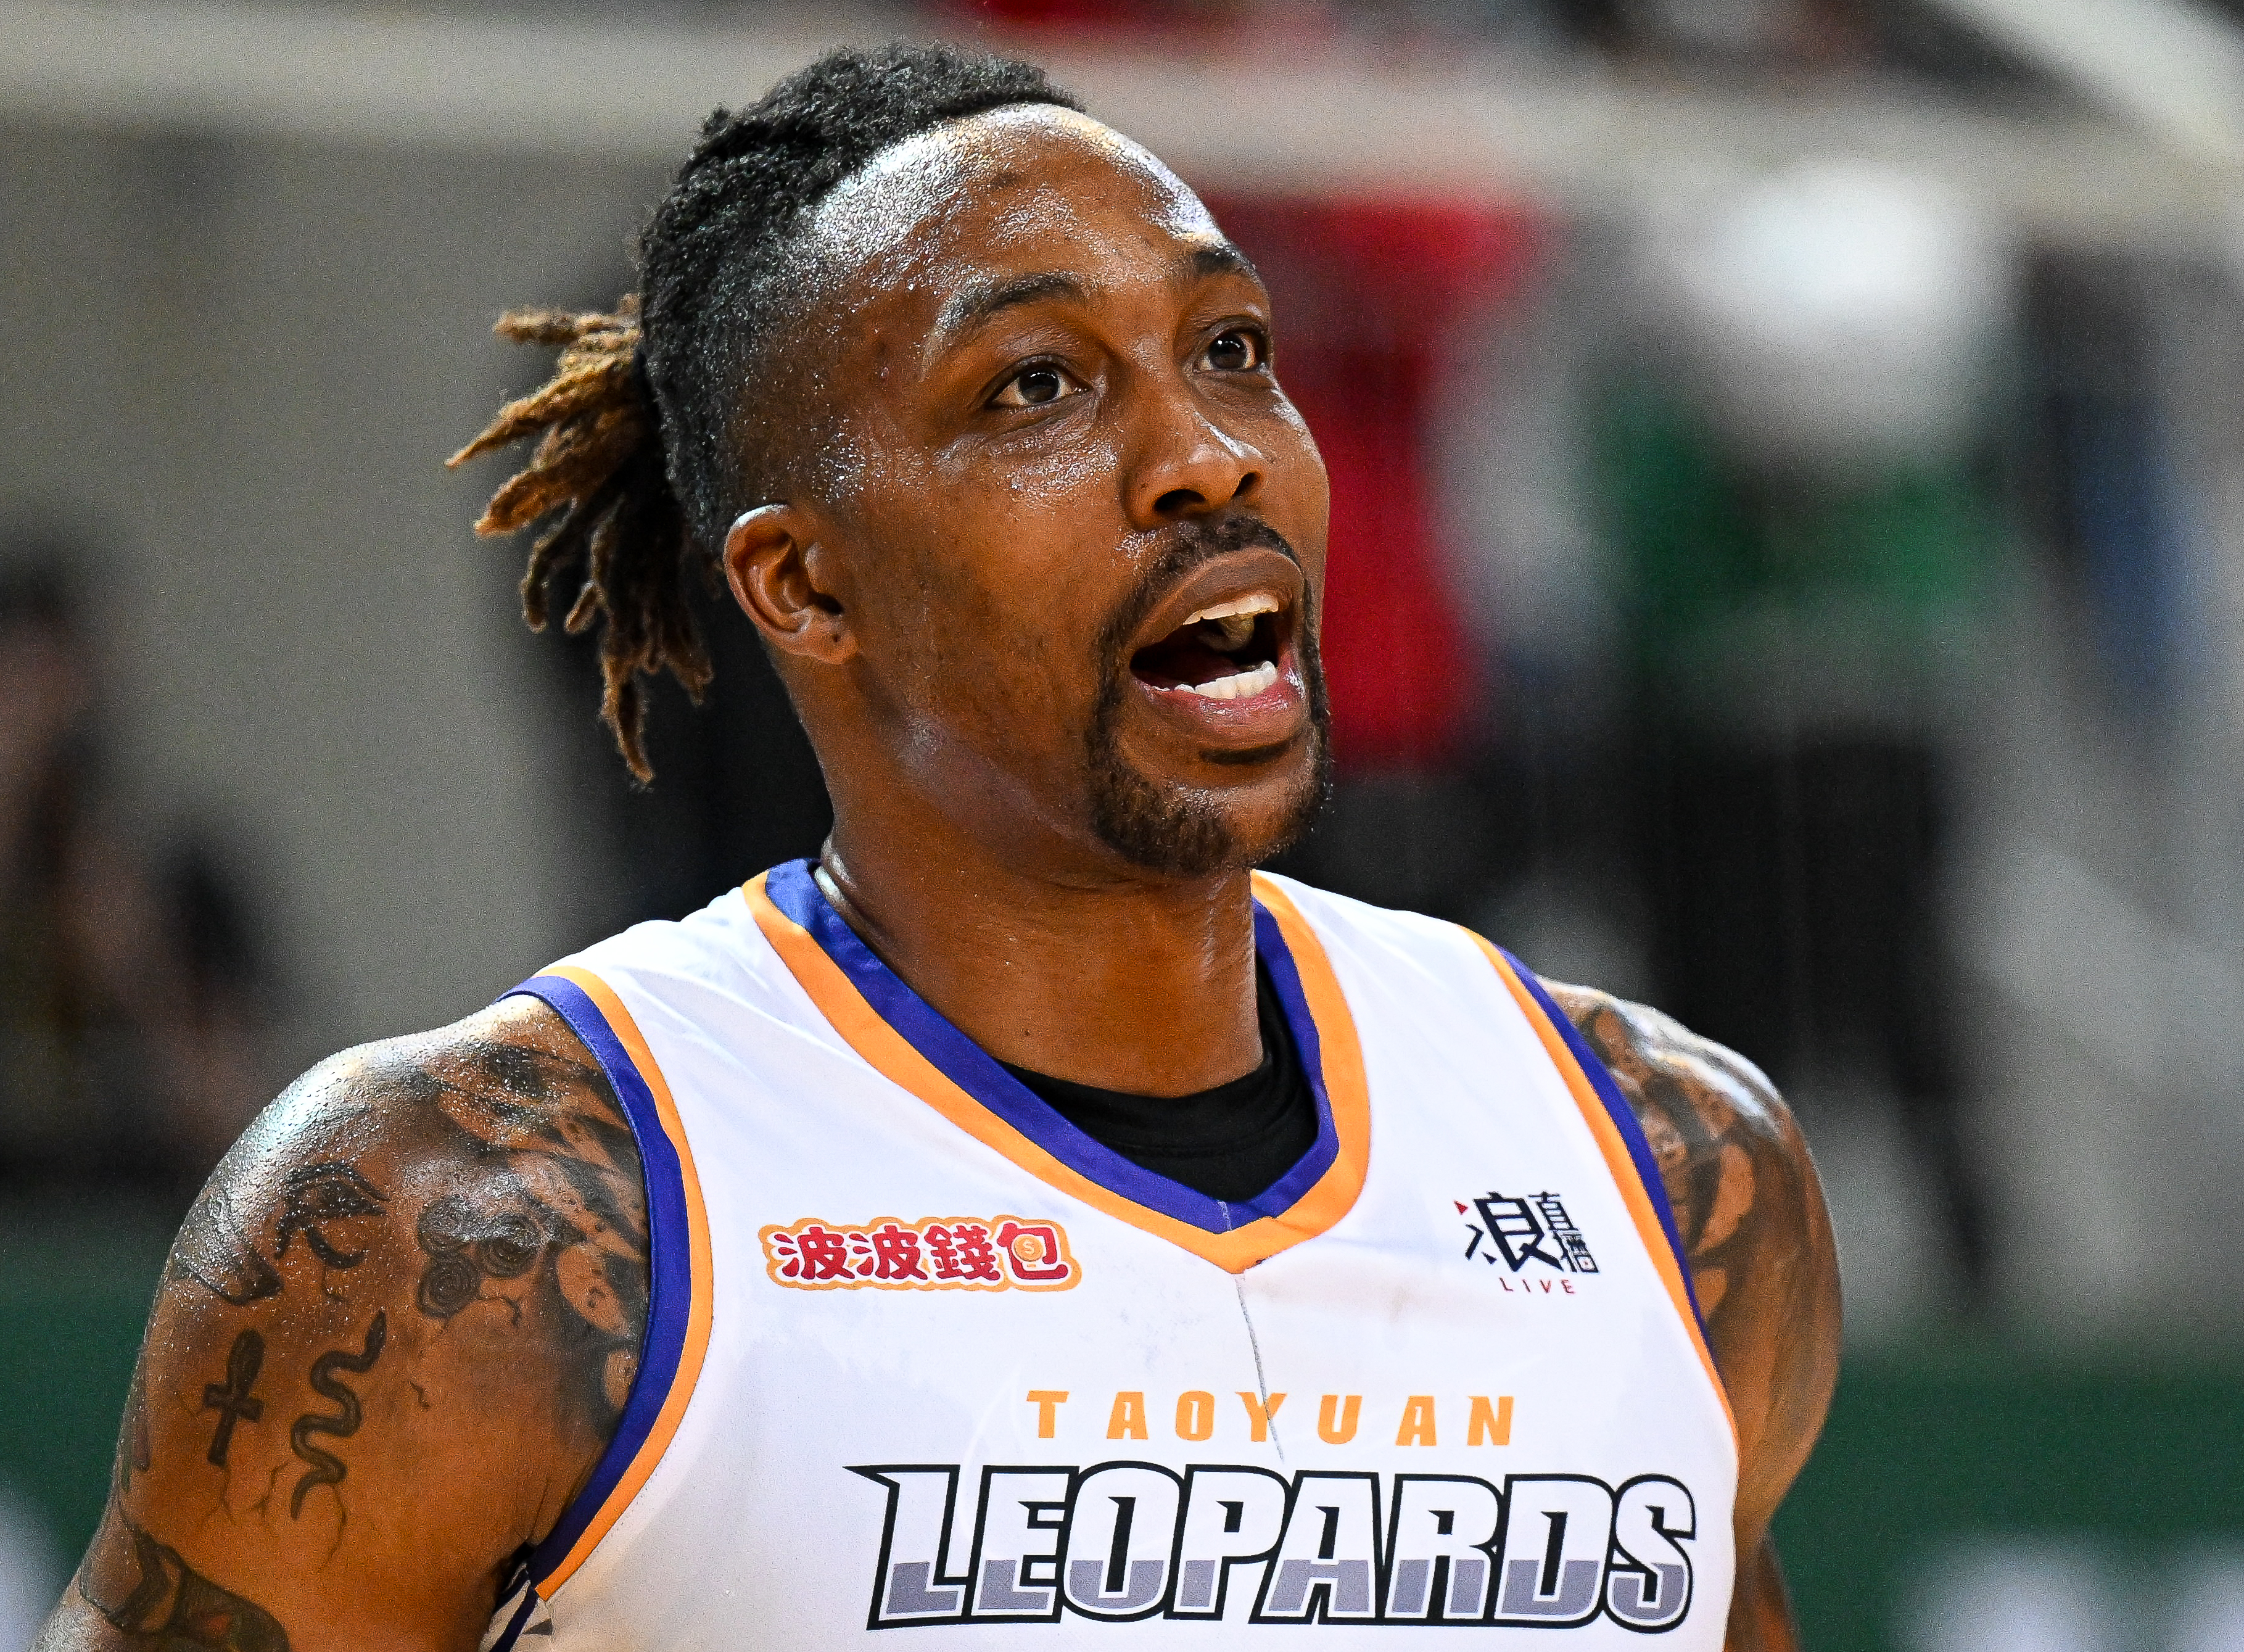 Dwight Howard of the Taoyuan Leopards reacts at the court during the T1 League game between TaiwanBeer HeroBears and Taoyuan Leopards at University of Taipei Tianmu Gymnasium on Feb. 19, 2023 in Taipei, Taiwan.